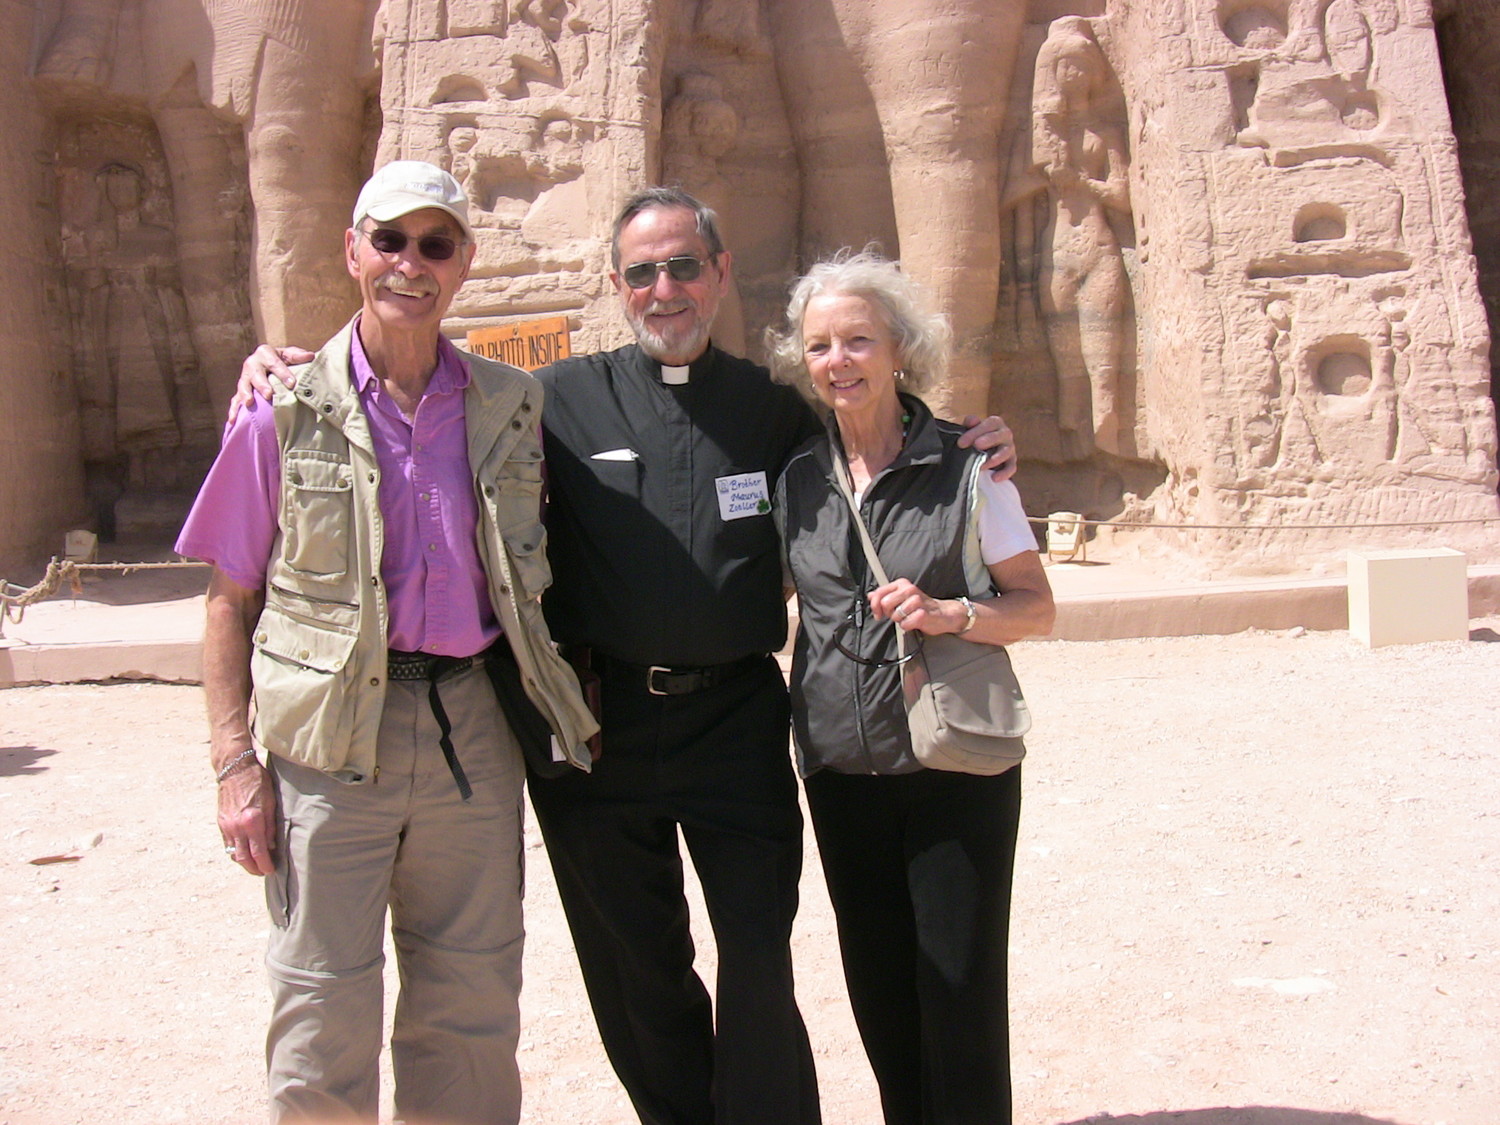 In this 2010 file photo, Thomas and Joan Rillo of St. Charles Borromeo Parish in Bloomington, Ind., pose with Benedictine Brother Maurus Zoeller of Saint Meinrad Archabbey in St. Meinrad during a pilgrimage the monk led to visit Old Testament sites in Egypt. Joan was diagnosed with Alzheimer’s disease that same year.